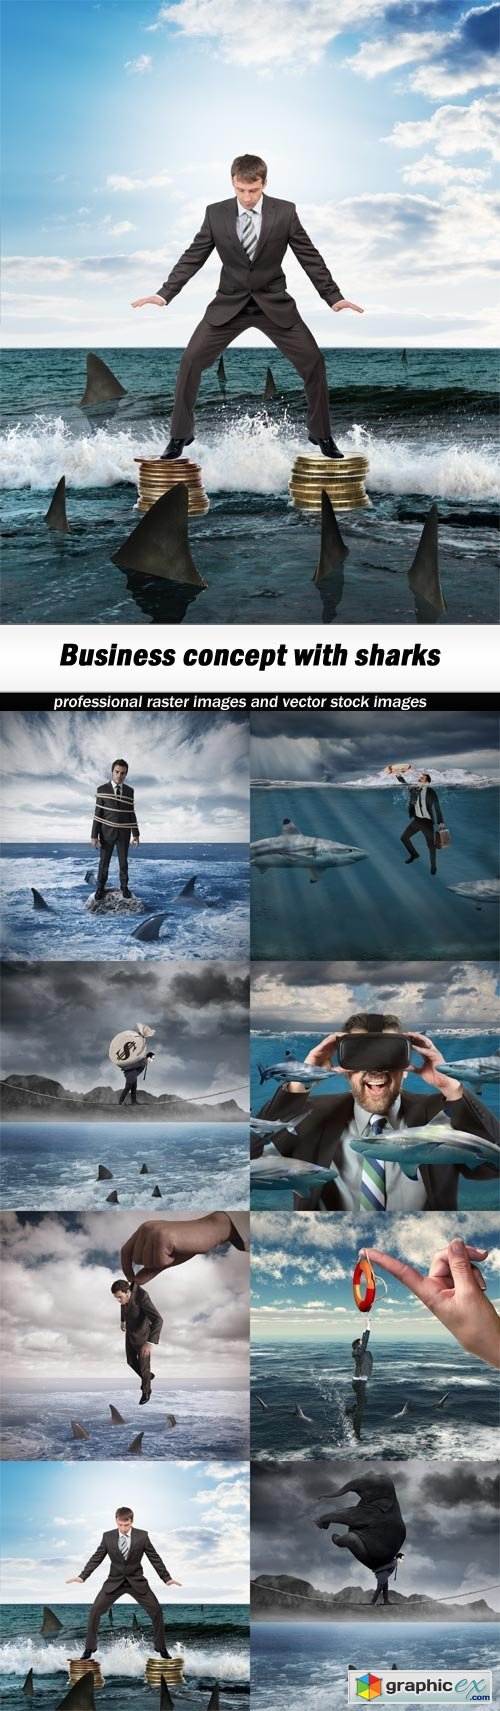 Business concept with sharks-8xJPEGs